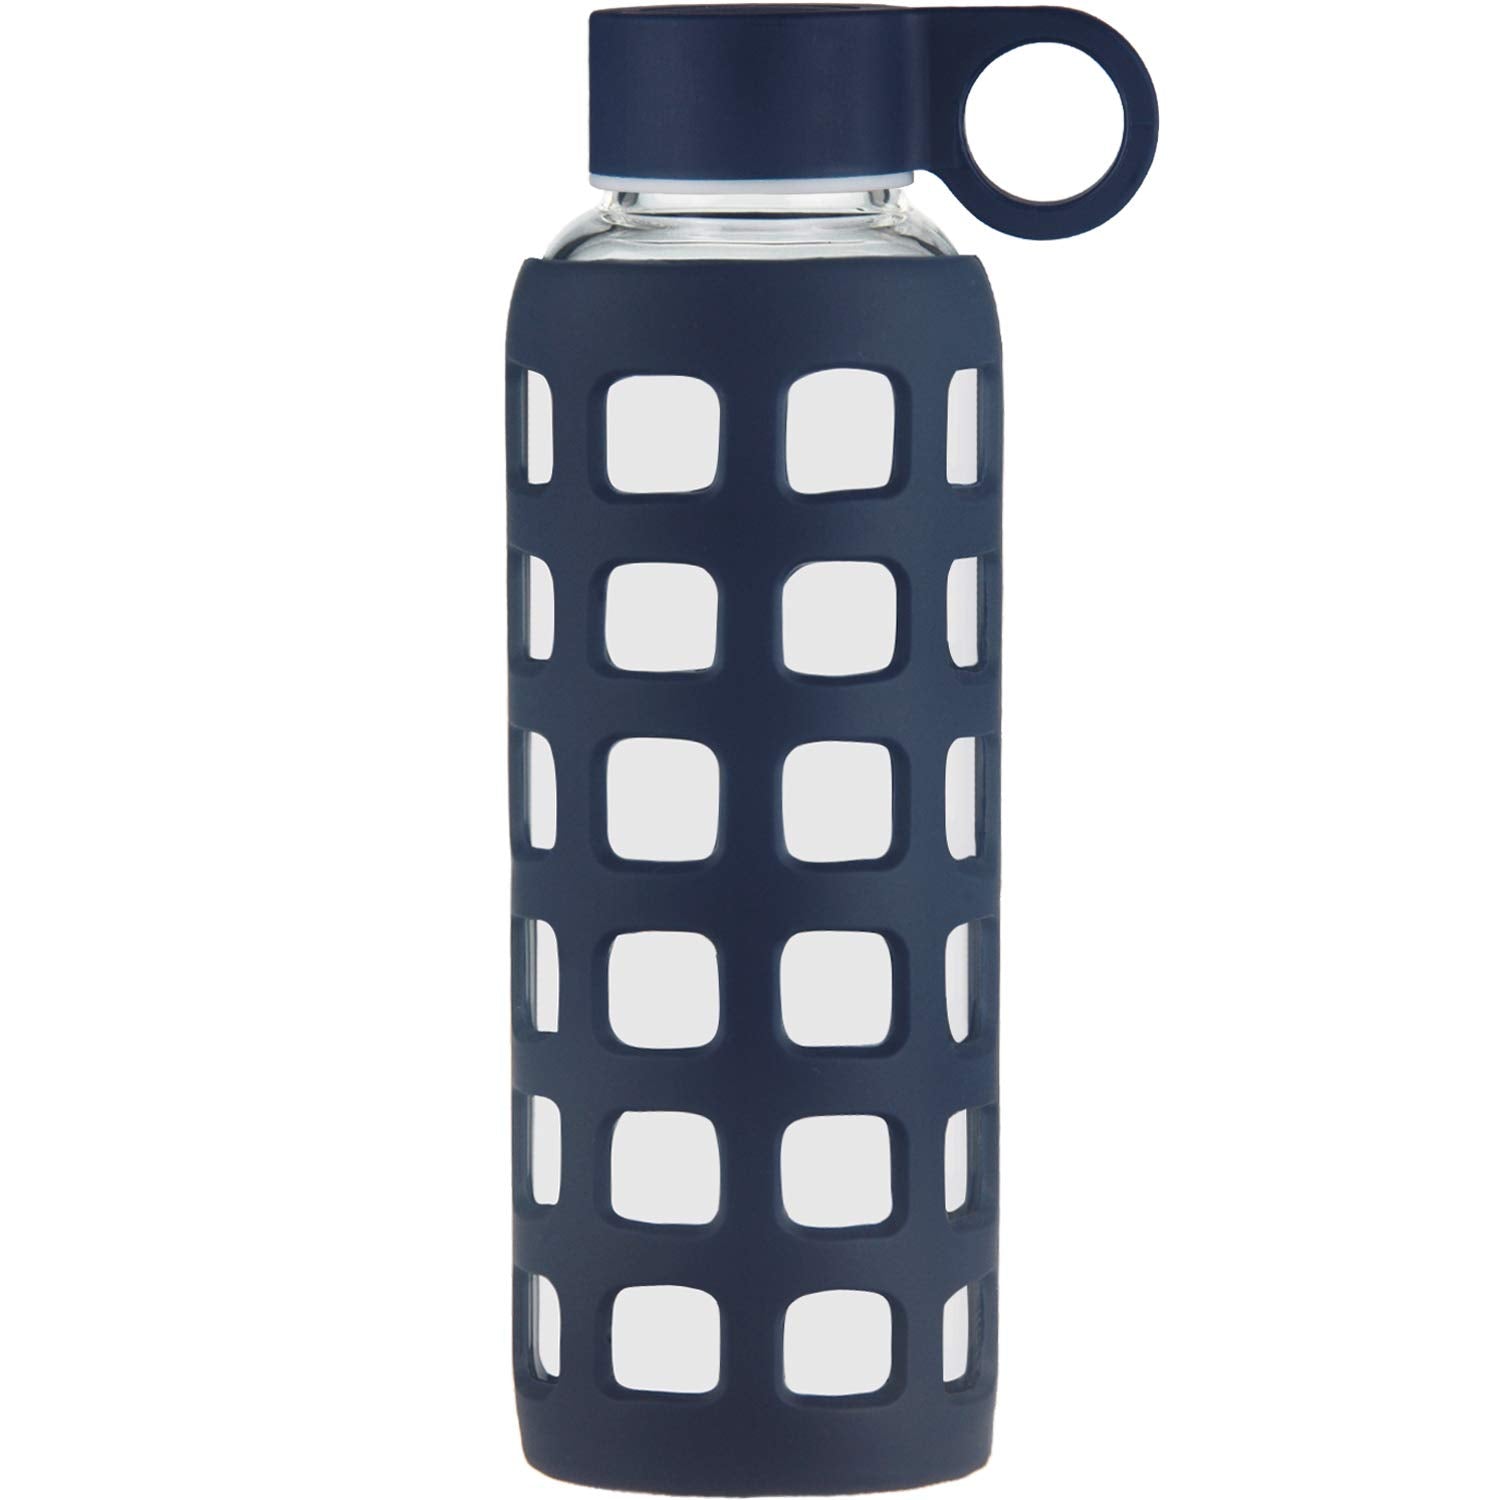 12oz Glass Water Bottle with Silicone Sleeve